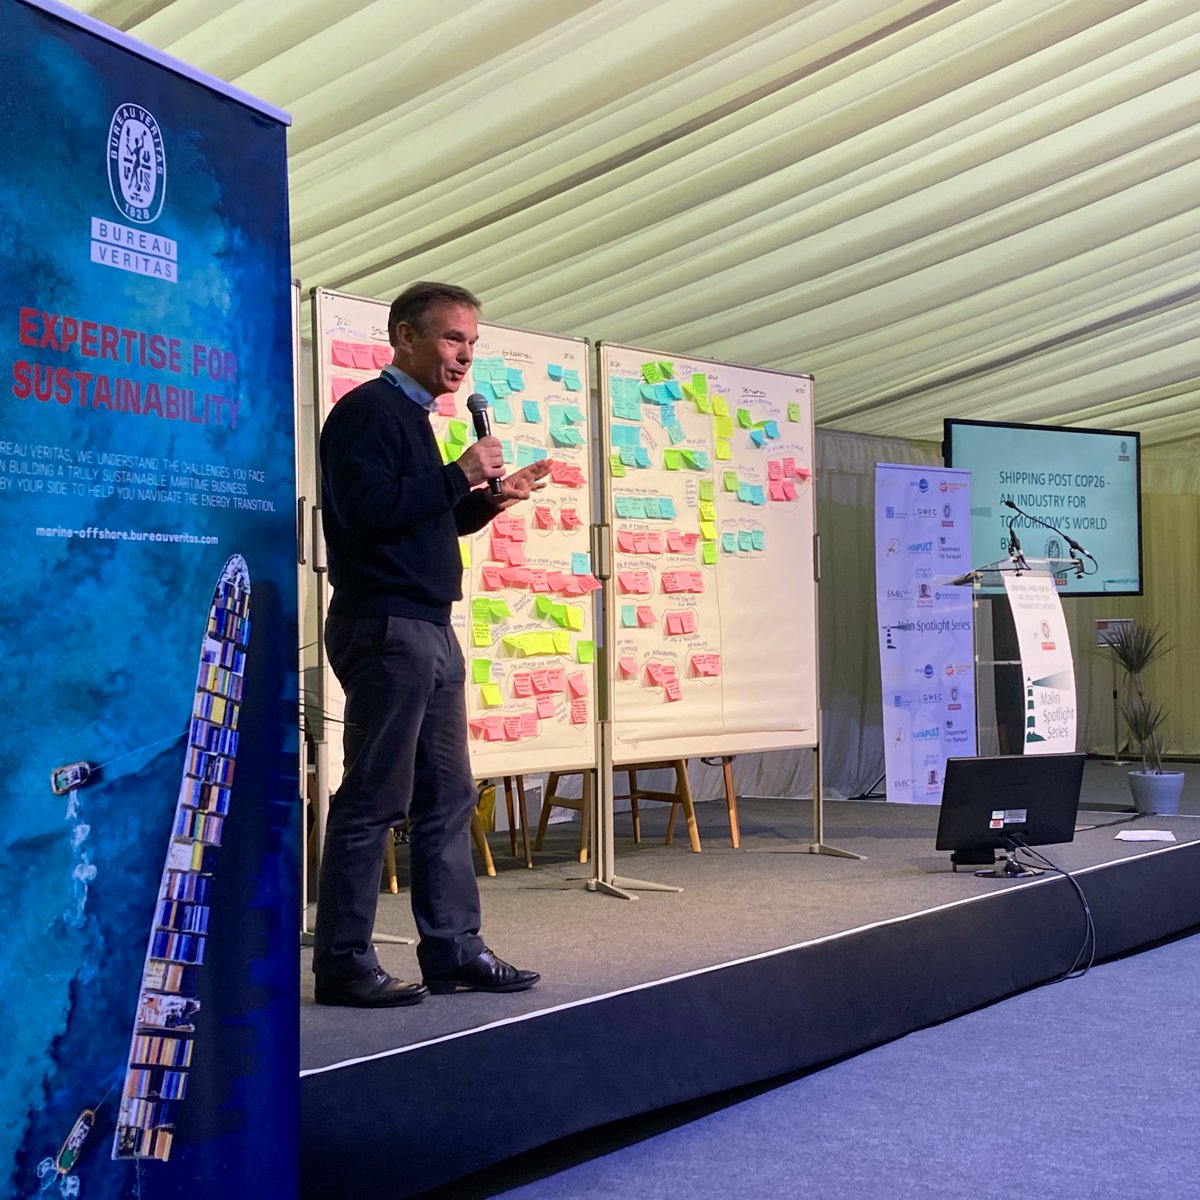 Plenty of ideas, concerns and hopes on where shipping goes next, via the medium of post-it notes, as we plot a path to #zerocarbon #shipping and system transformation by 2050. #COP26 #malinspotlightseries